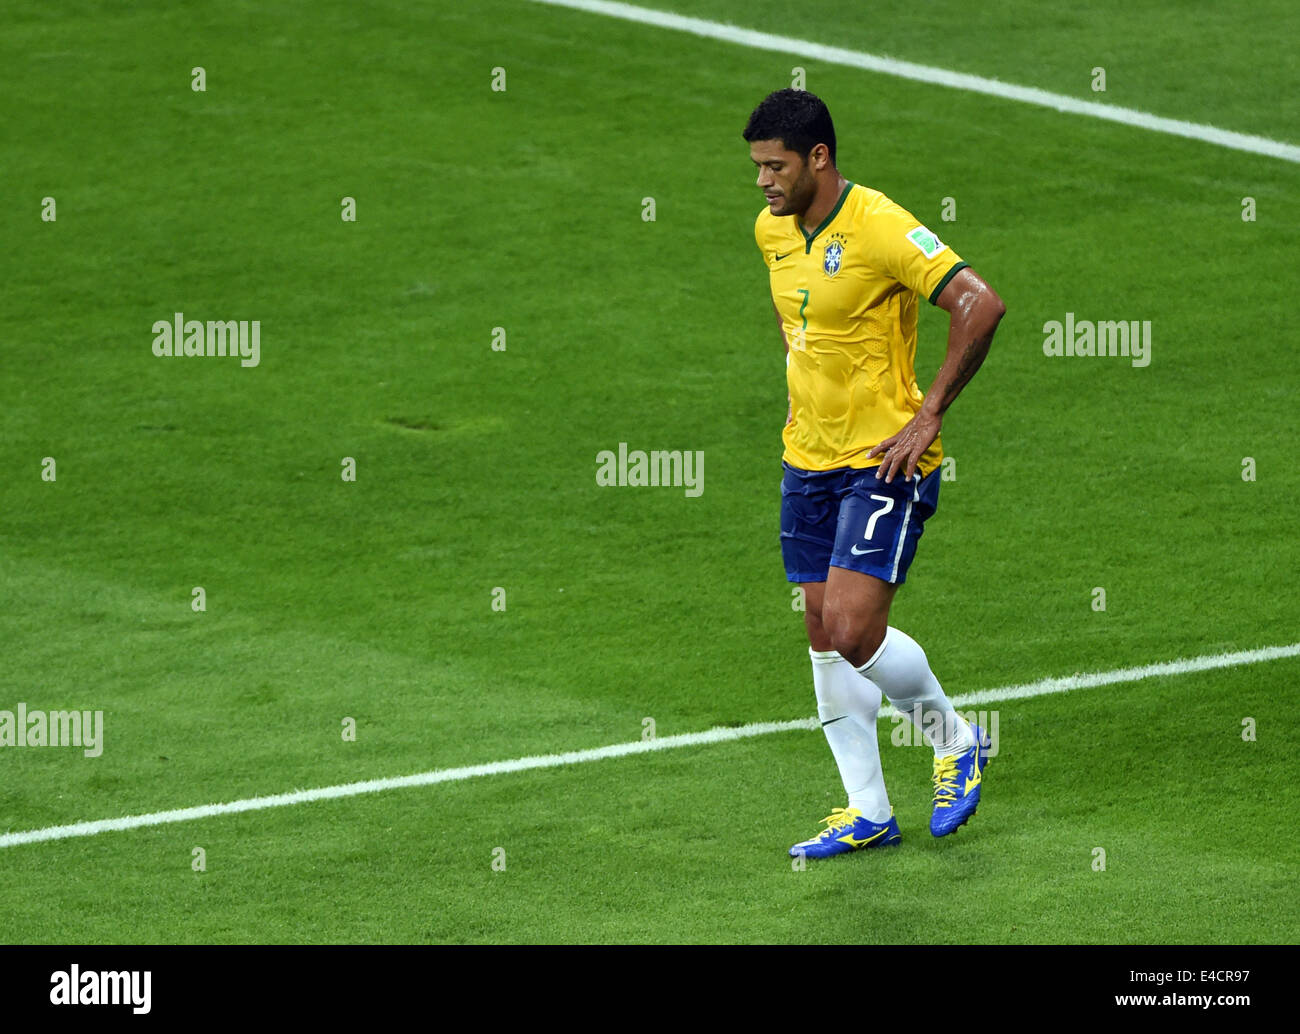 Belo Horizonte, Brazil. 08th July, 2014. Brazil's Hulk leaves the pitch during the FIFA World Cup 2014 semi-final soccer match between Brazil and Germany at Estadio Mineirao in Belo Horizonte, Brazil, 08 July 2014. Photo: Andreas Gebert/dpa/Alamy Live News Stock Photo